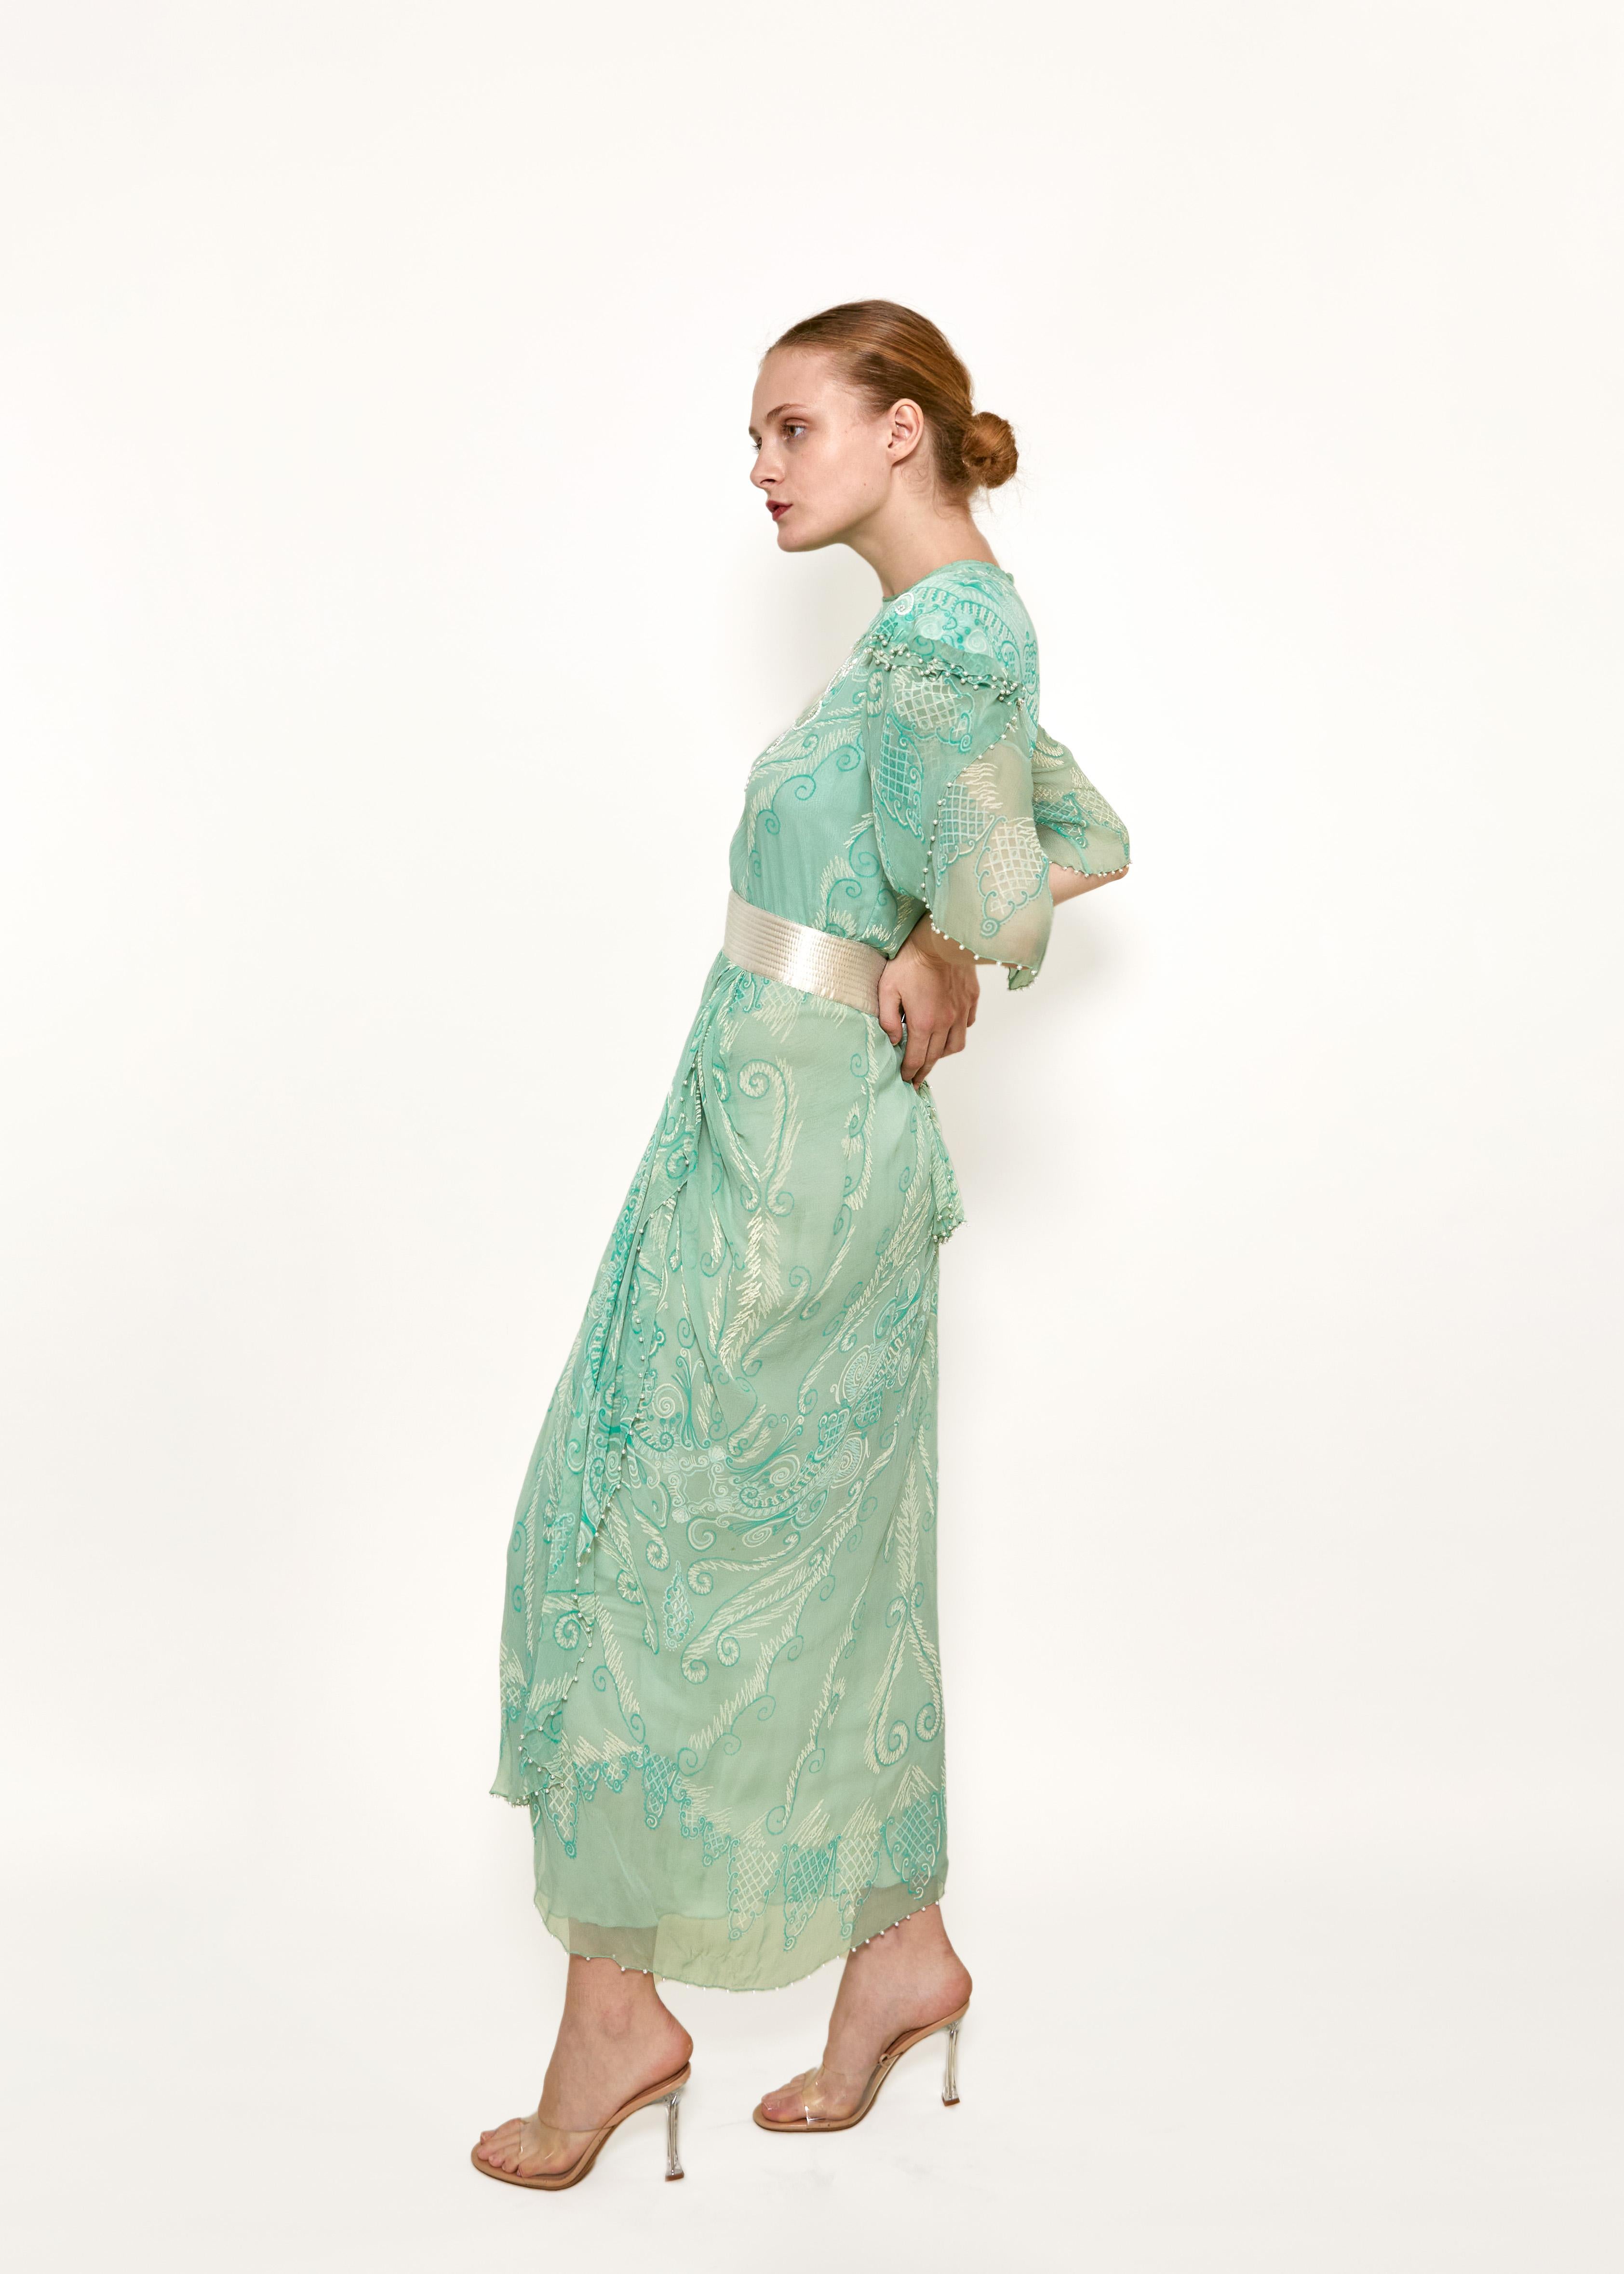 Indulge in luxury with our Zandra Rhodes Mint Green Pearl Trimmed Satin Belt Dress. From her Venetian Splendour S/S 1989 Collection. The pearlescent and embellished details add a touch of elegance to the soft mint green hue. The satin belt cinches